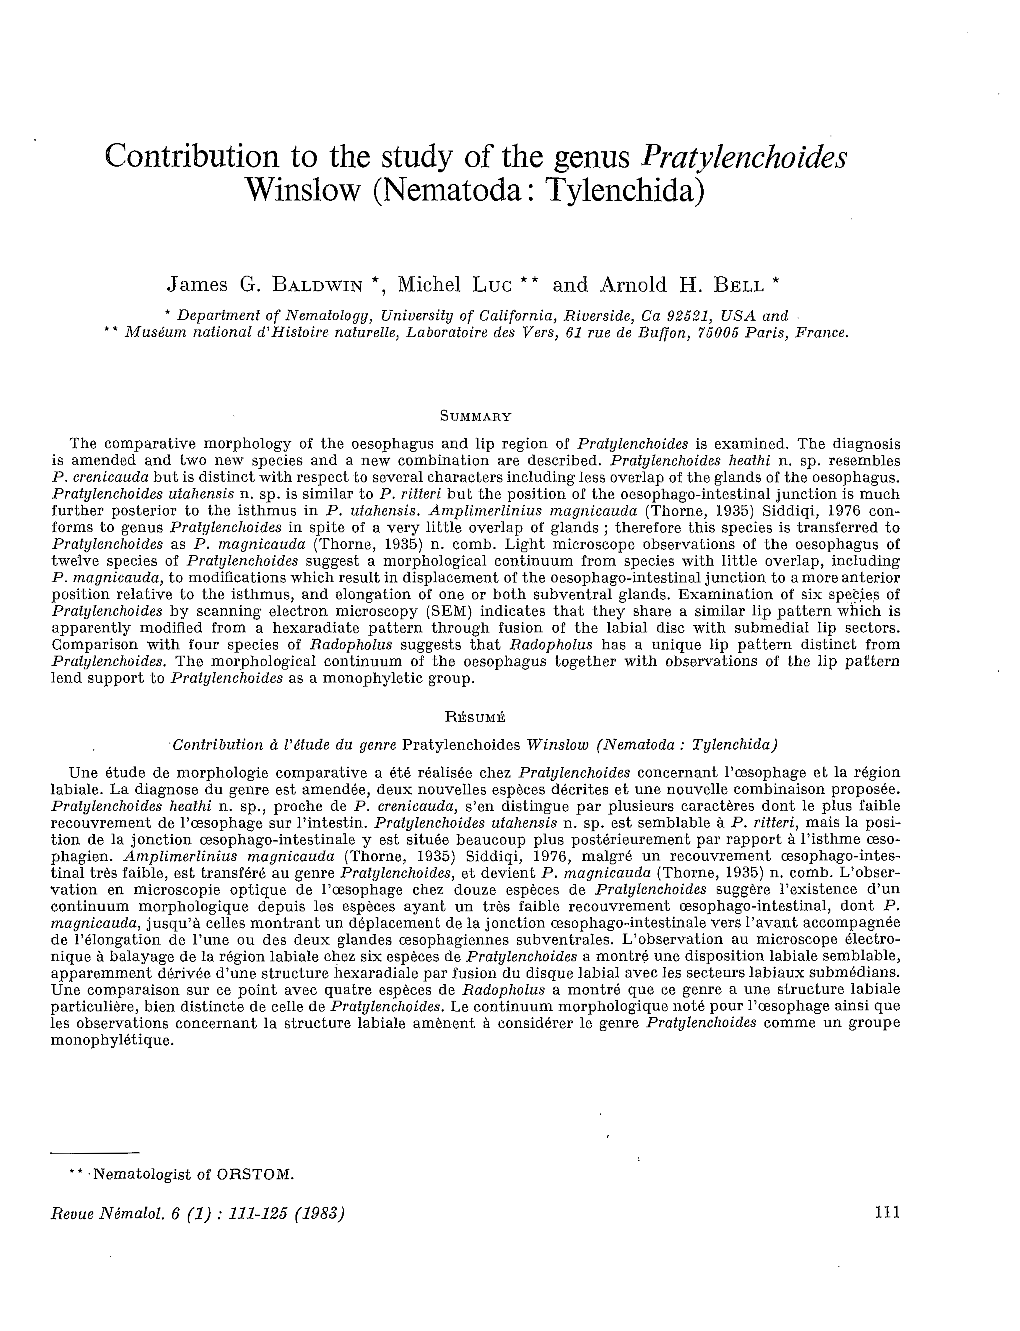 Contribution to the Study of the Genus Pratylenchoides Winslow